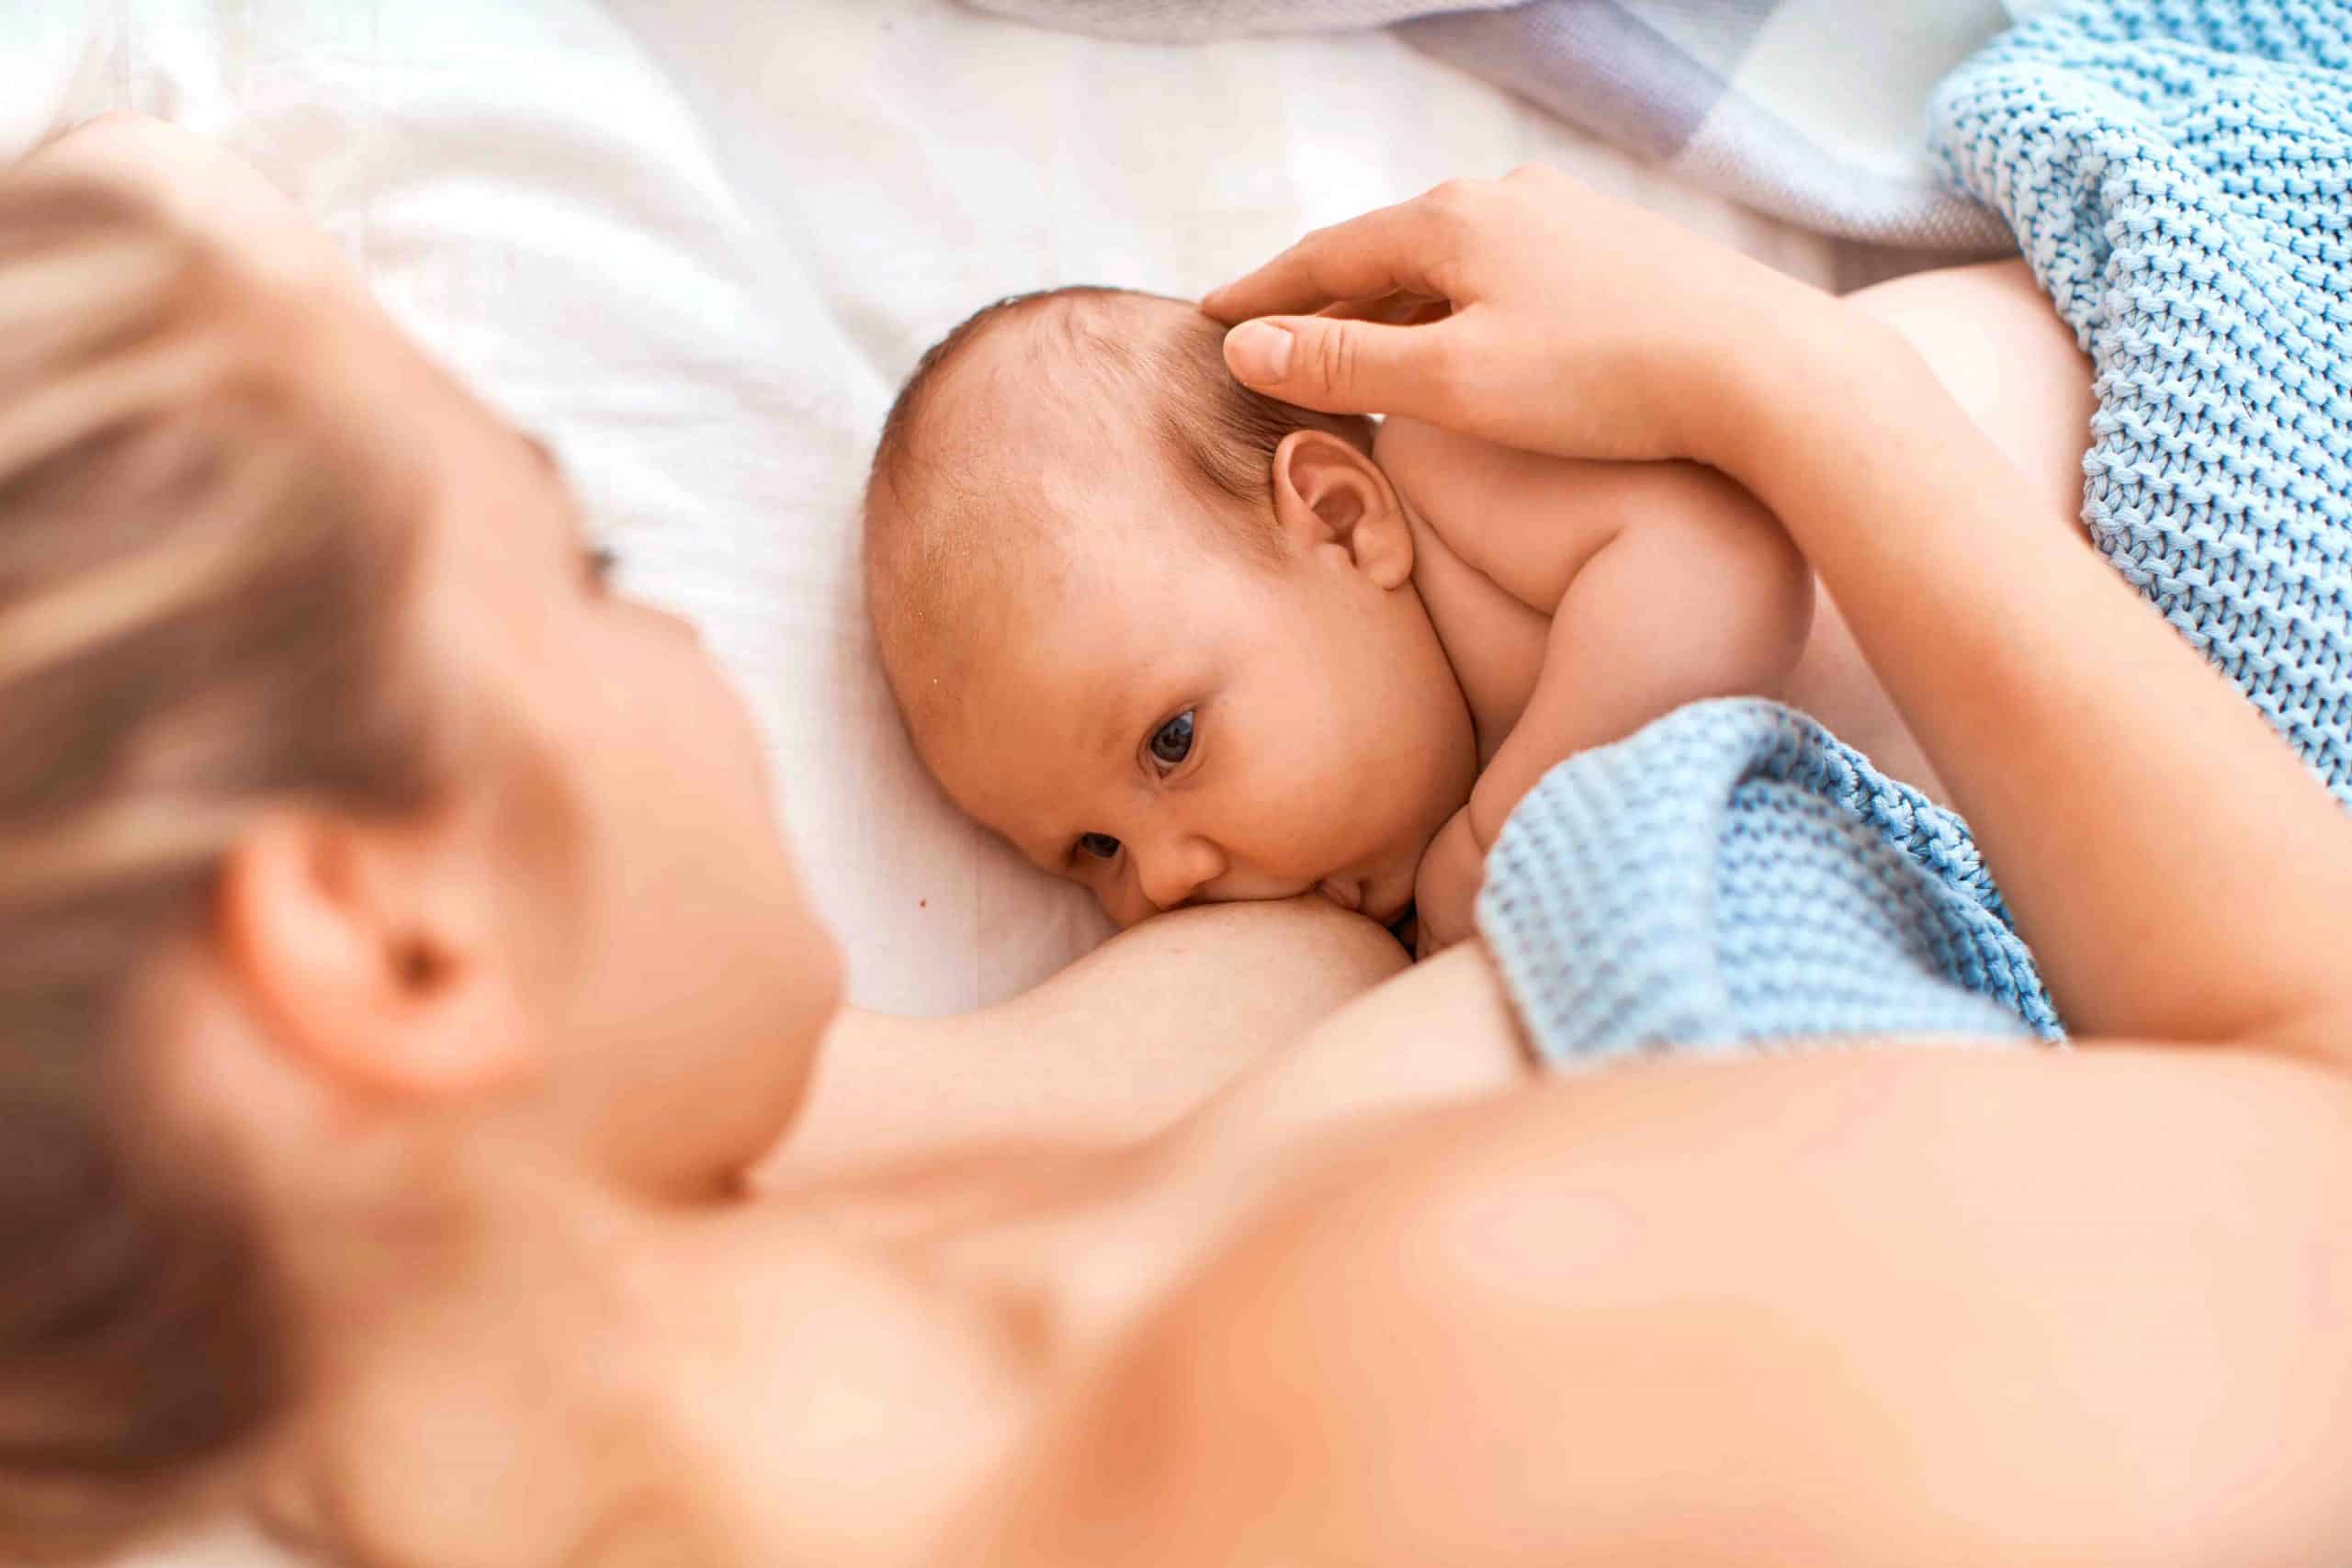 Top 10 Helpful and Effective Tips For Breastfeeding Success